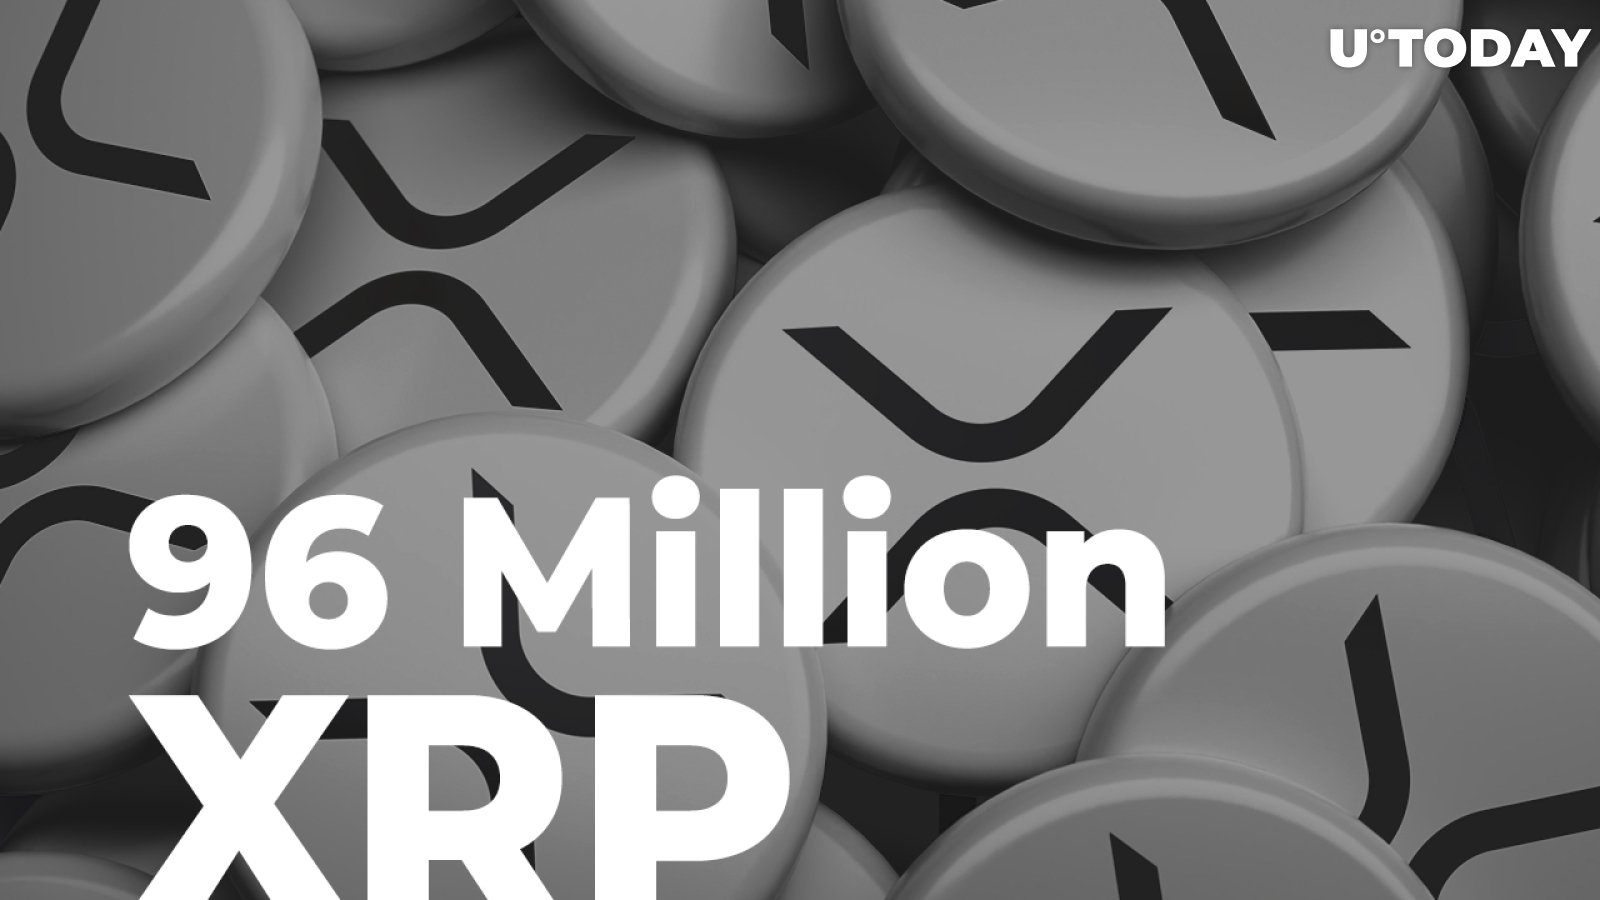 Ripple Helps Wire 96 Million XRP Once It Sends 800 Million Back to Escrow